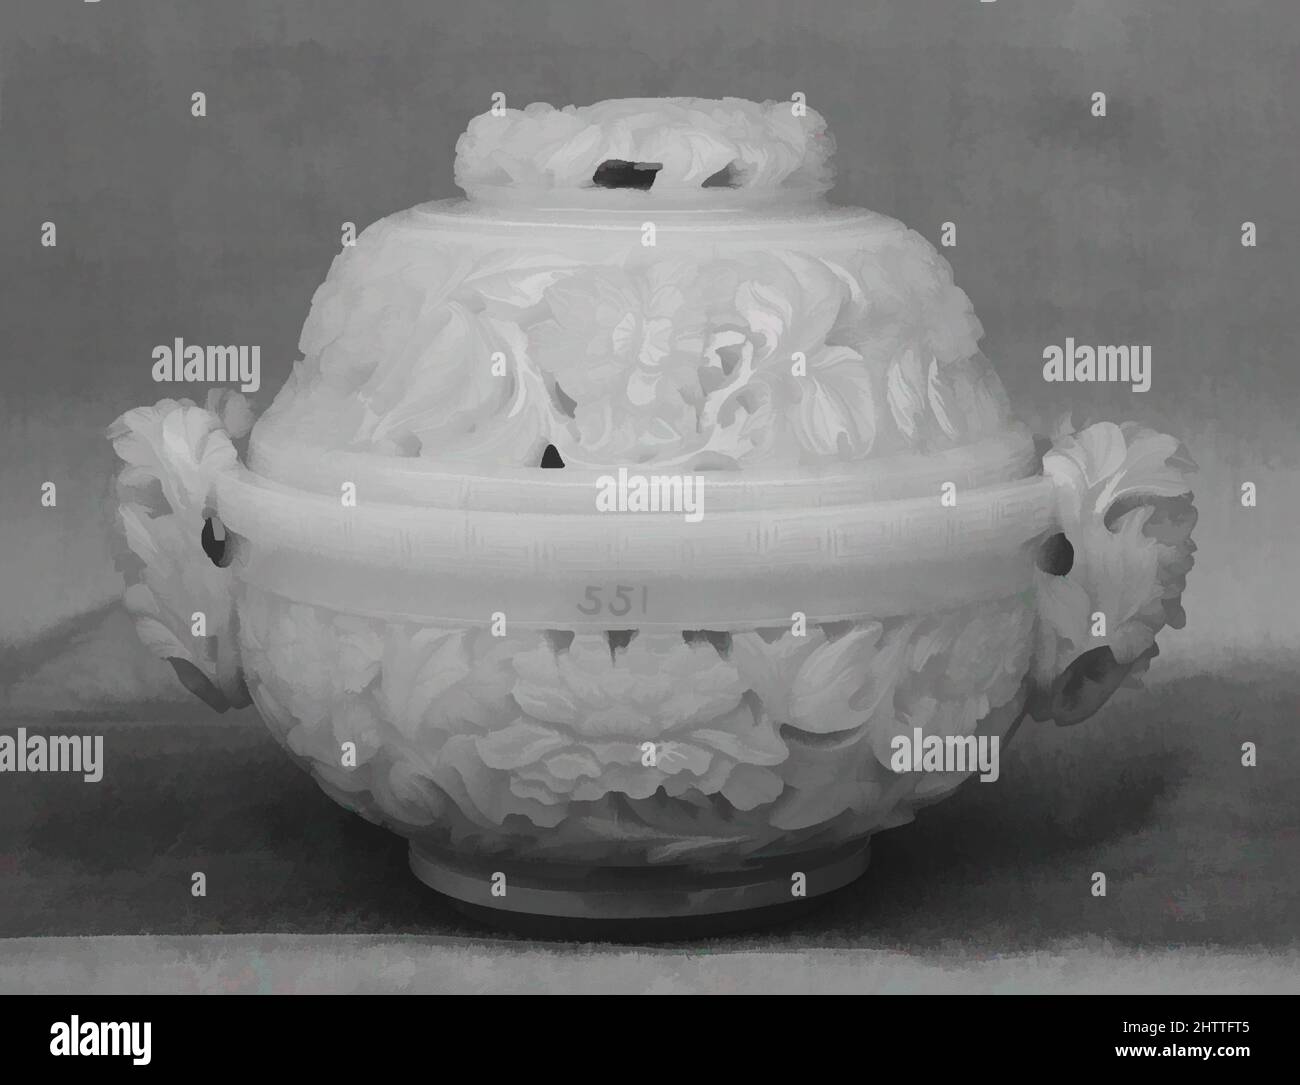 Art inspired by Incense burner with cover, Qing dynasty (1644–1911), Qianlong period (1736–95), China, Nephrite, white with very light greenish tint, H. 3 7/8 in. (9.8 cm); W. 5 3/8 in. (13.6 cm), Jade, Classic works modernized by Artotop with a splash of modernity. Shapes, color and value, eye-catching visual impact on art. Emotions through freedom of artworks in a contemporary way. A timeless message pursuing a wildly creative new direction. Artists turning to the digital medium and creating the Artotop NFT Stock Photo